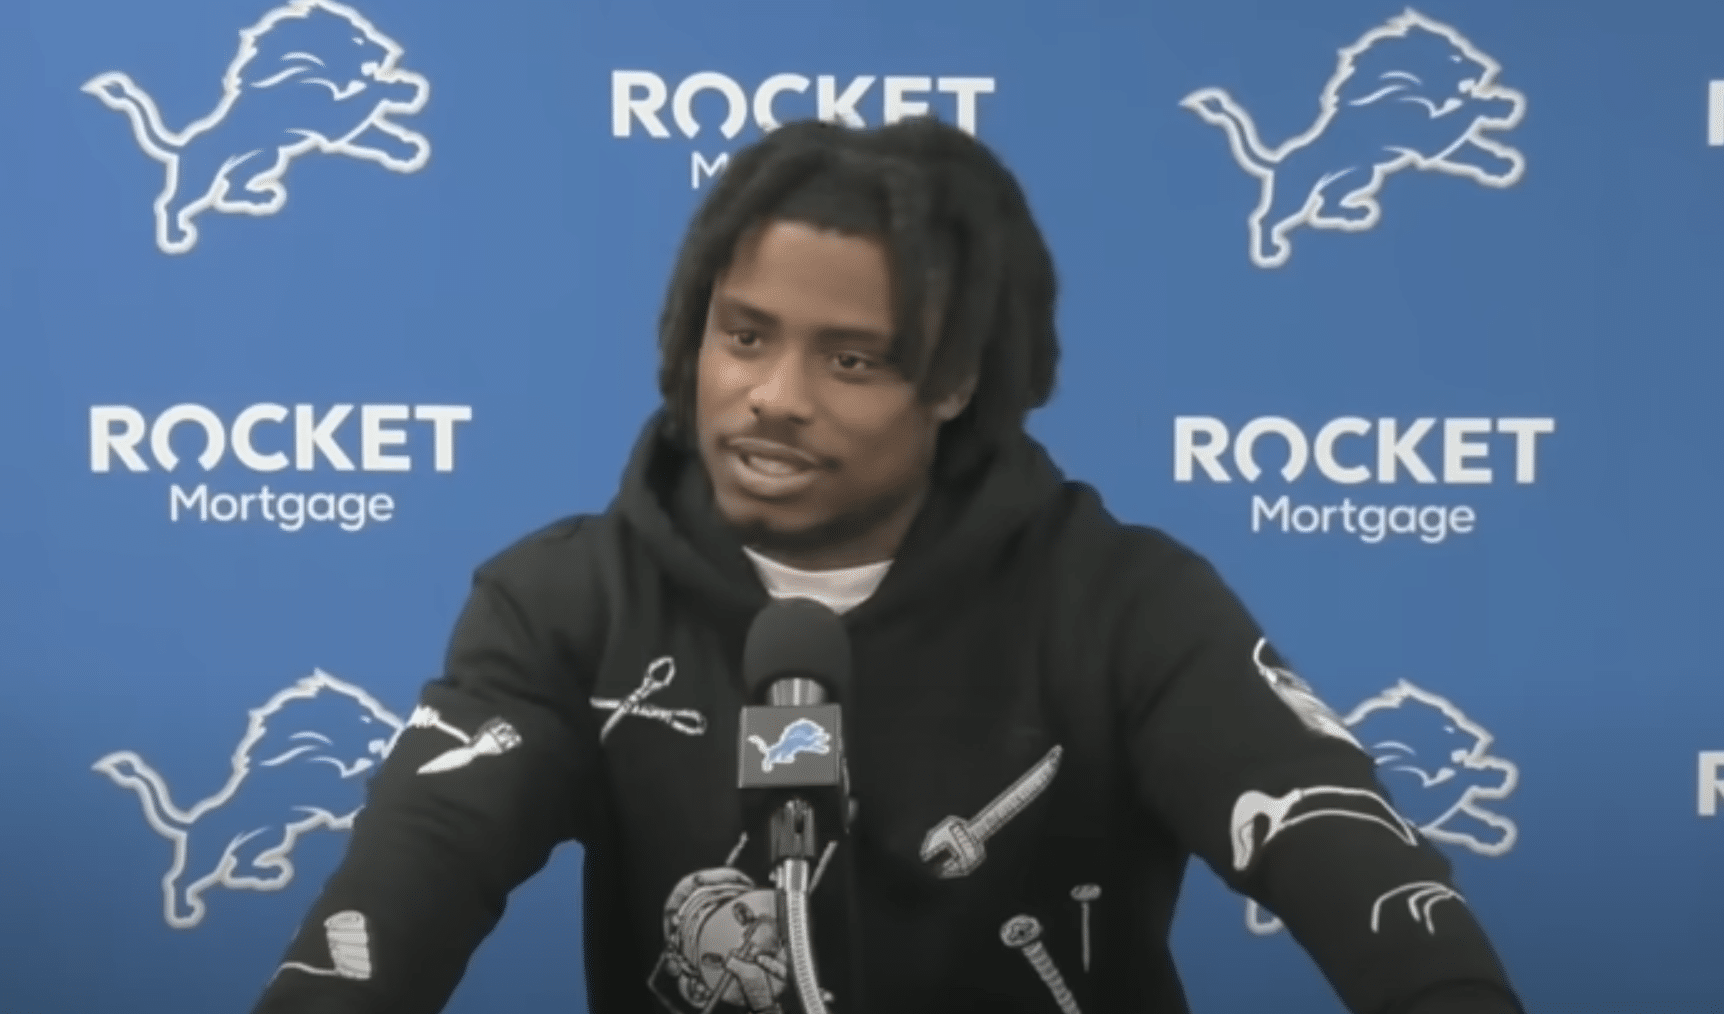 C.J. Gardner-Johnson calls out Kansas City Chiefs HC Andy Reid C.J. Gardner Johnson got punched in face C.J. Gardner-Johnson's request for Detroit Lions fans C.J. Gardner-Johnson says Detroit Lions are 'never gonna win a championship'